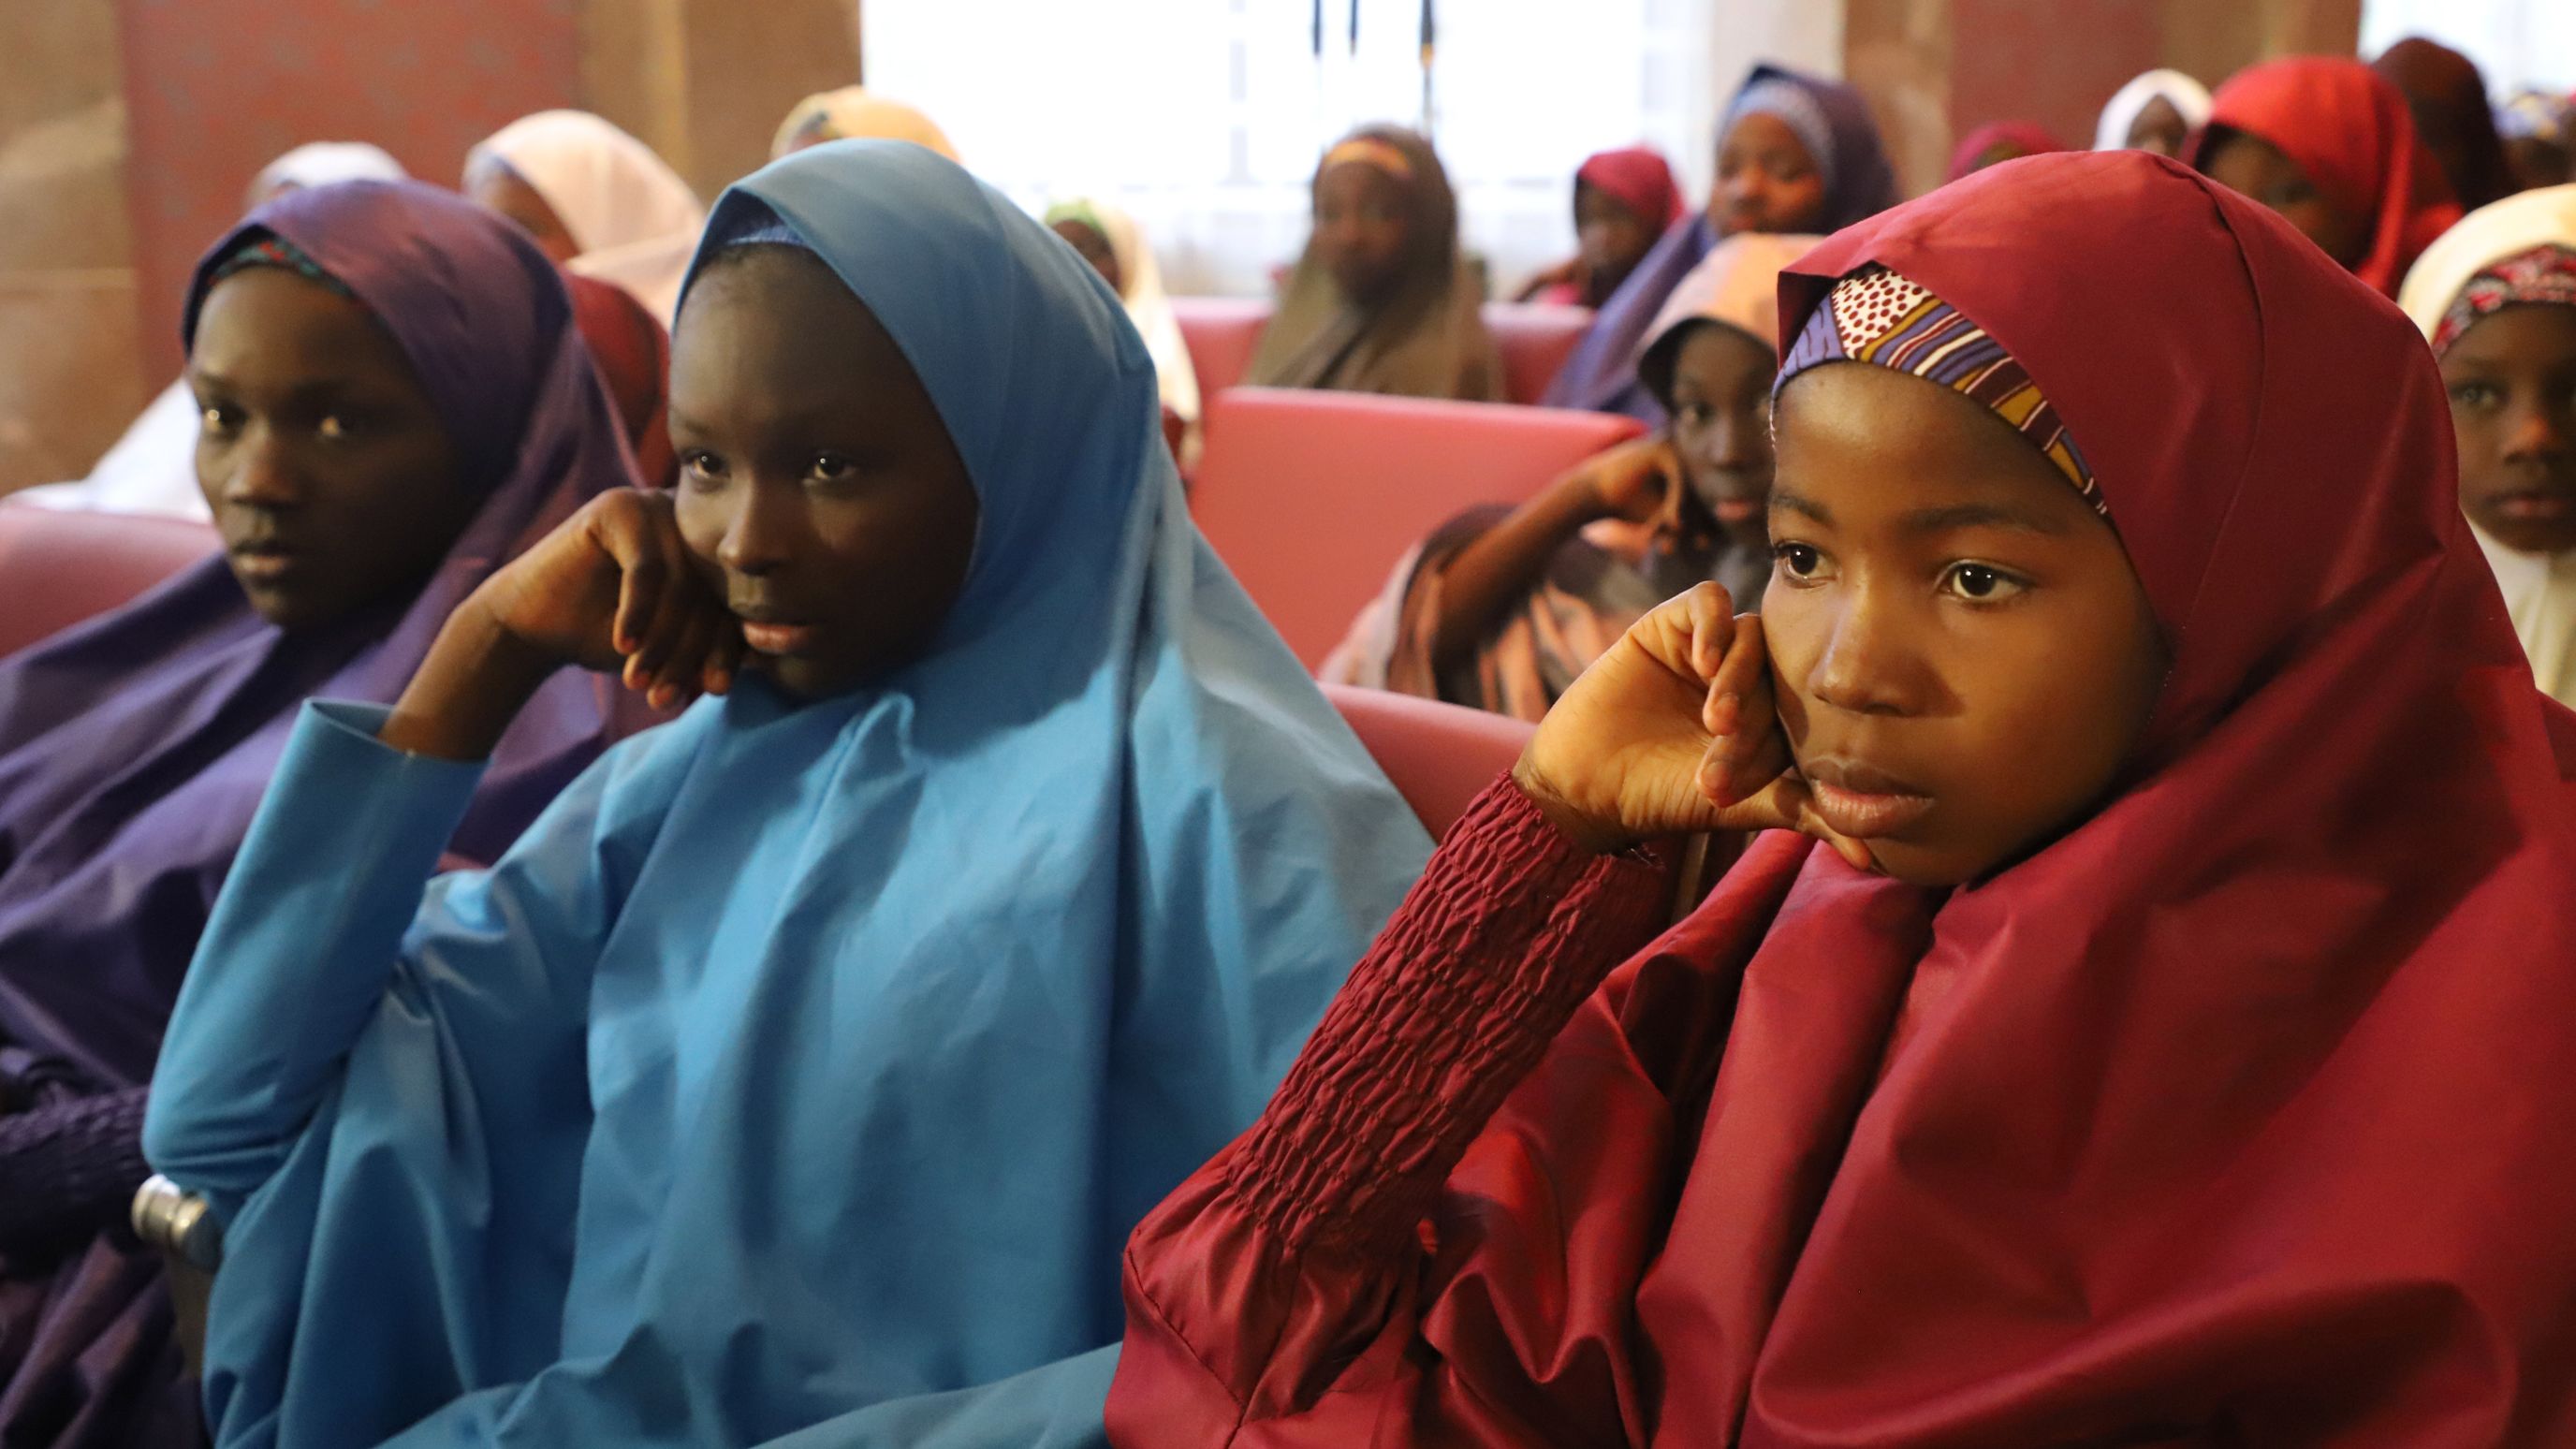 Some of the Dapchi schoolgirls released by Boko Haram sit before their meeting with the Nigerian President on Friday.